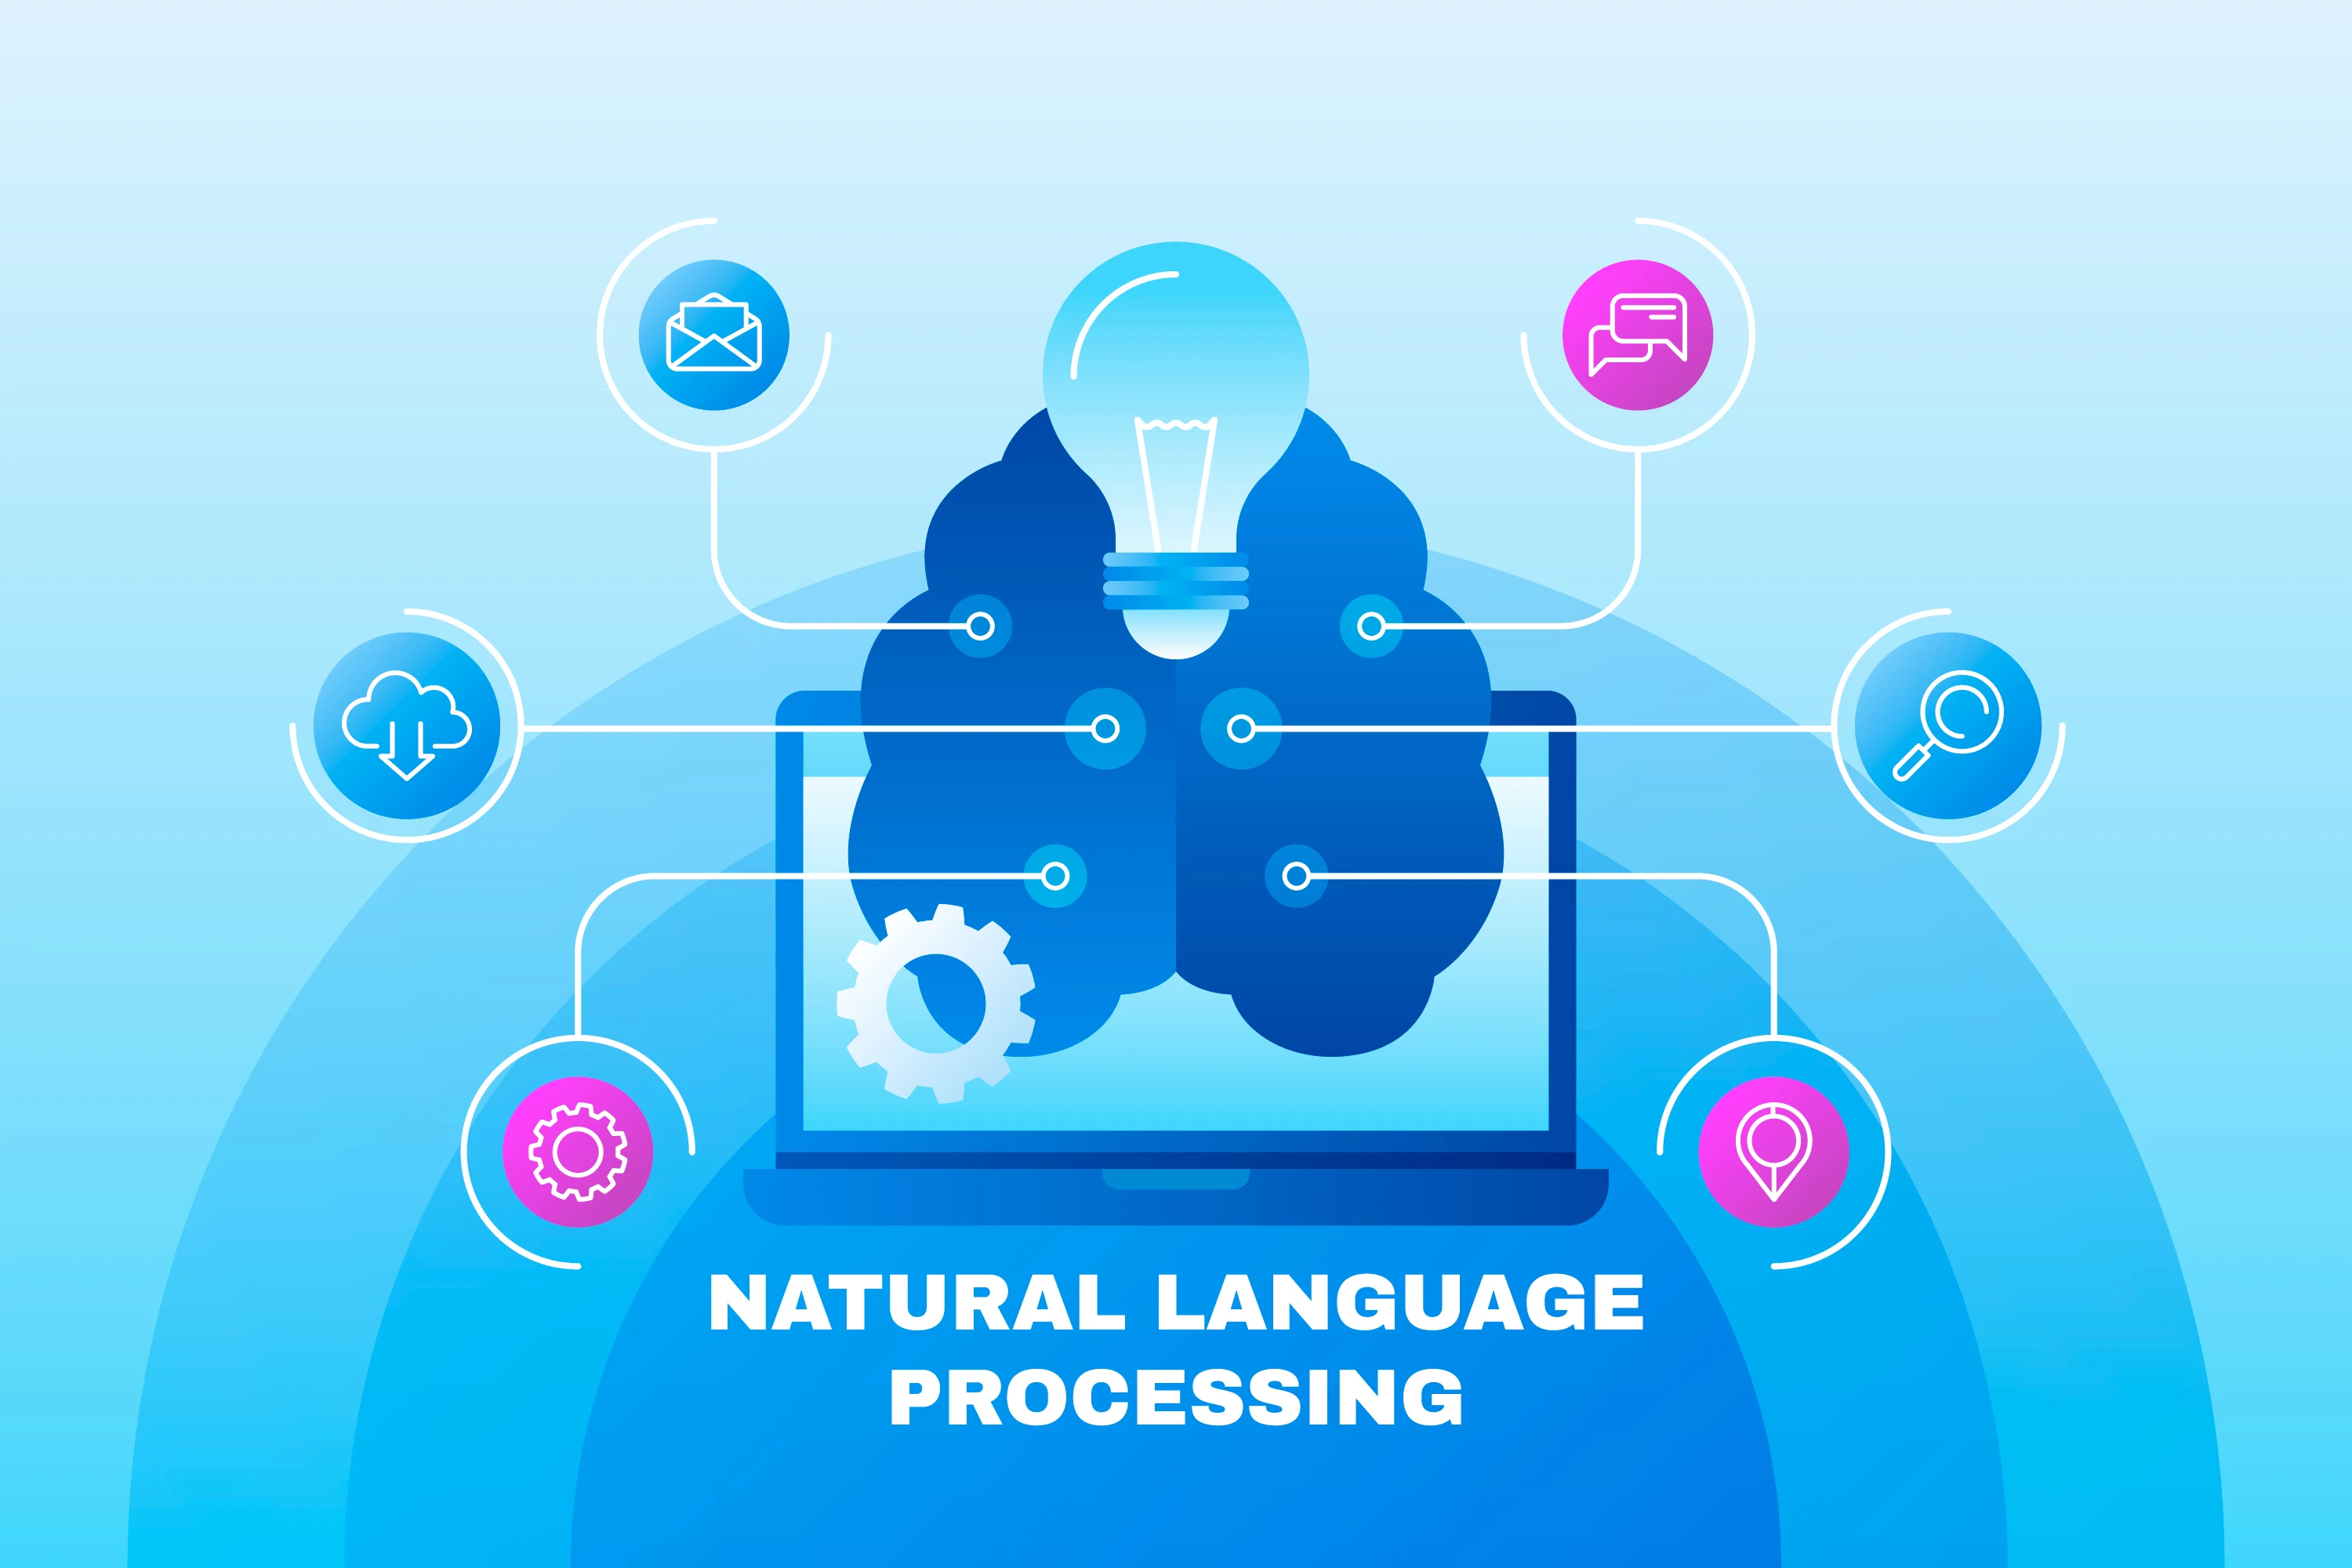 Understanding the Core Concepts and Principles of NLP